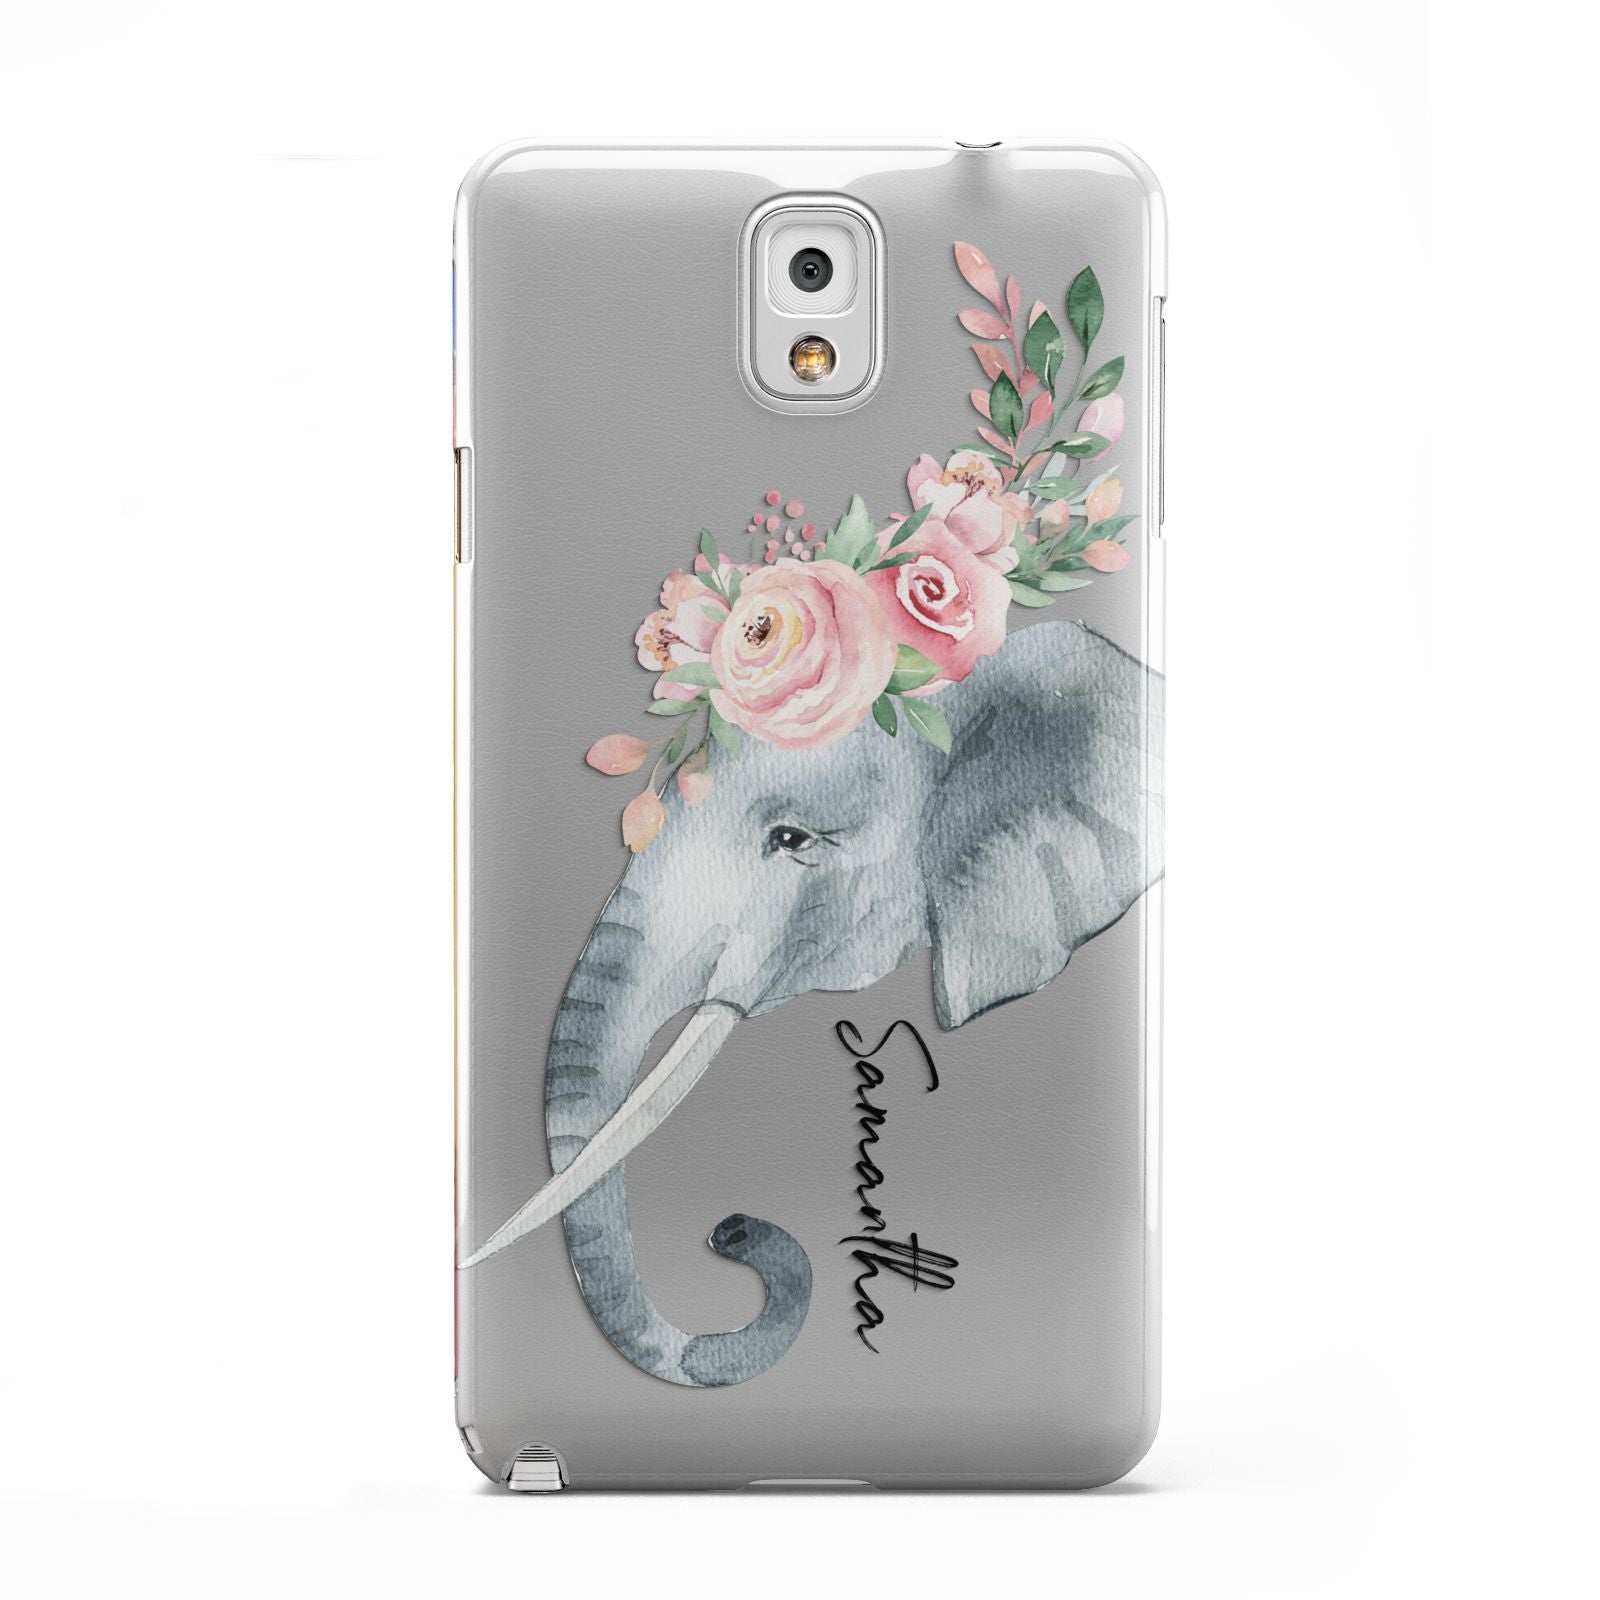 Personalised Elephant Samsung Galaxy Note 3 Case